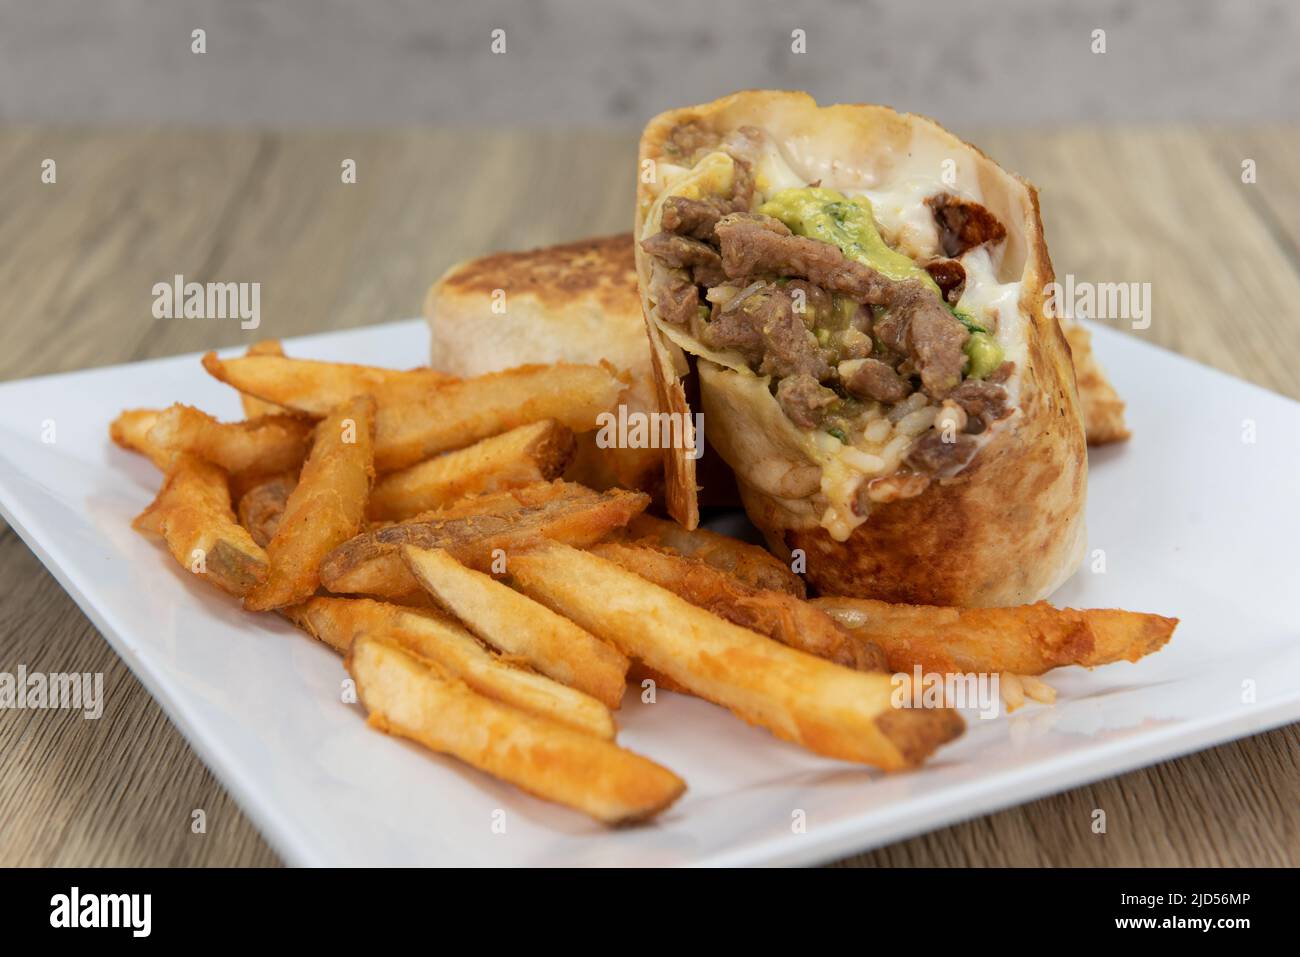 Appetizing carne asada steak burrito cut in half and served with french fries for a tempting Mexican food delicacy. Stock Photo